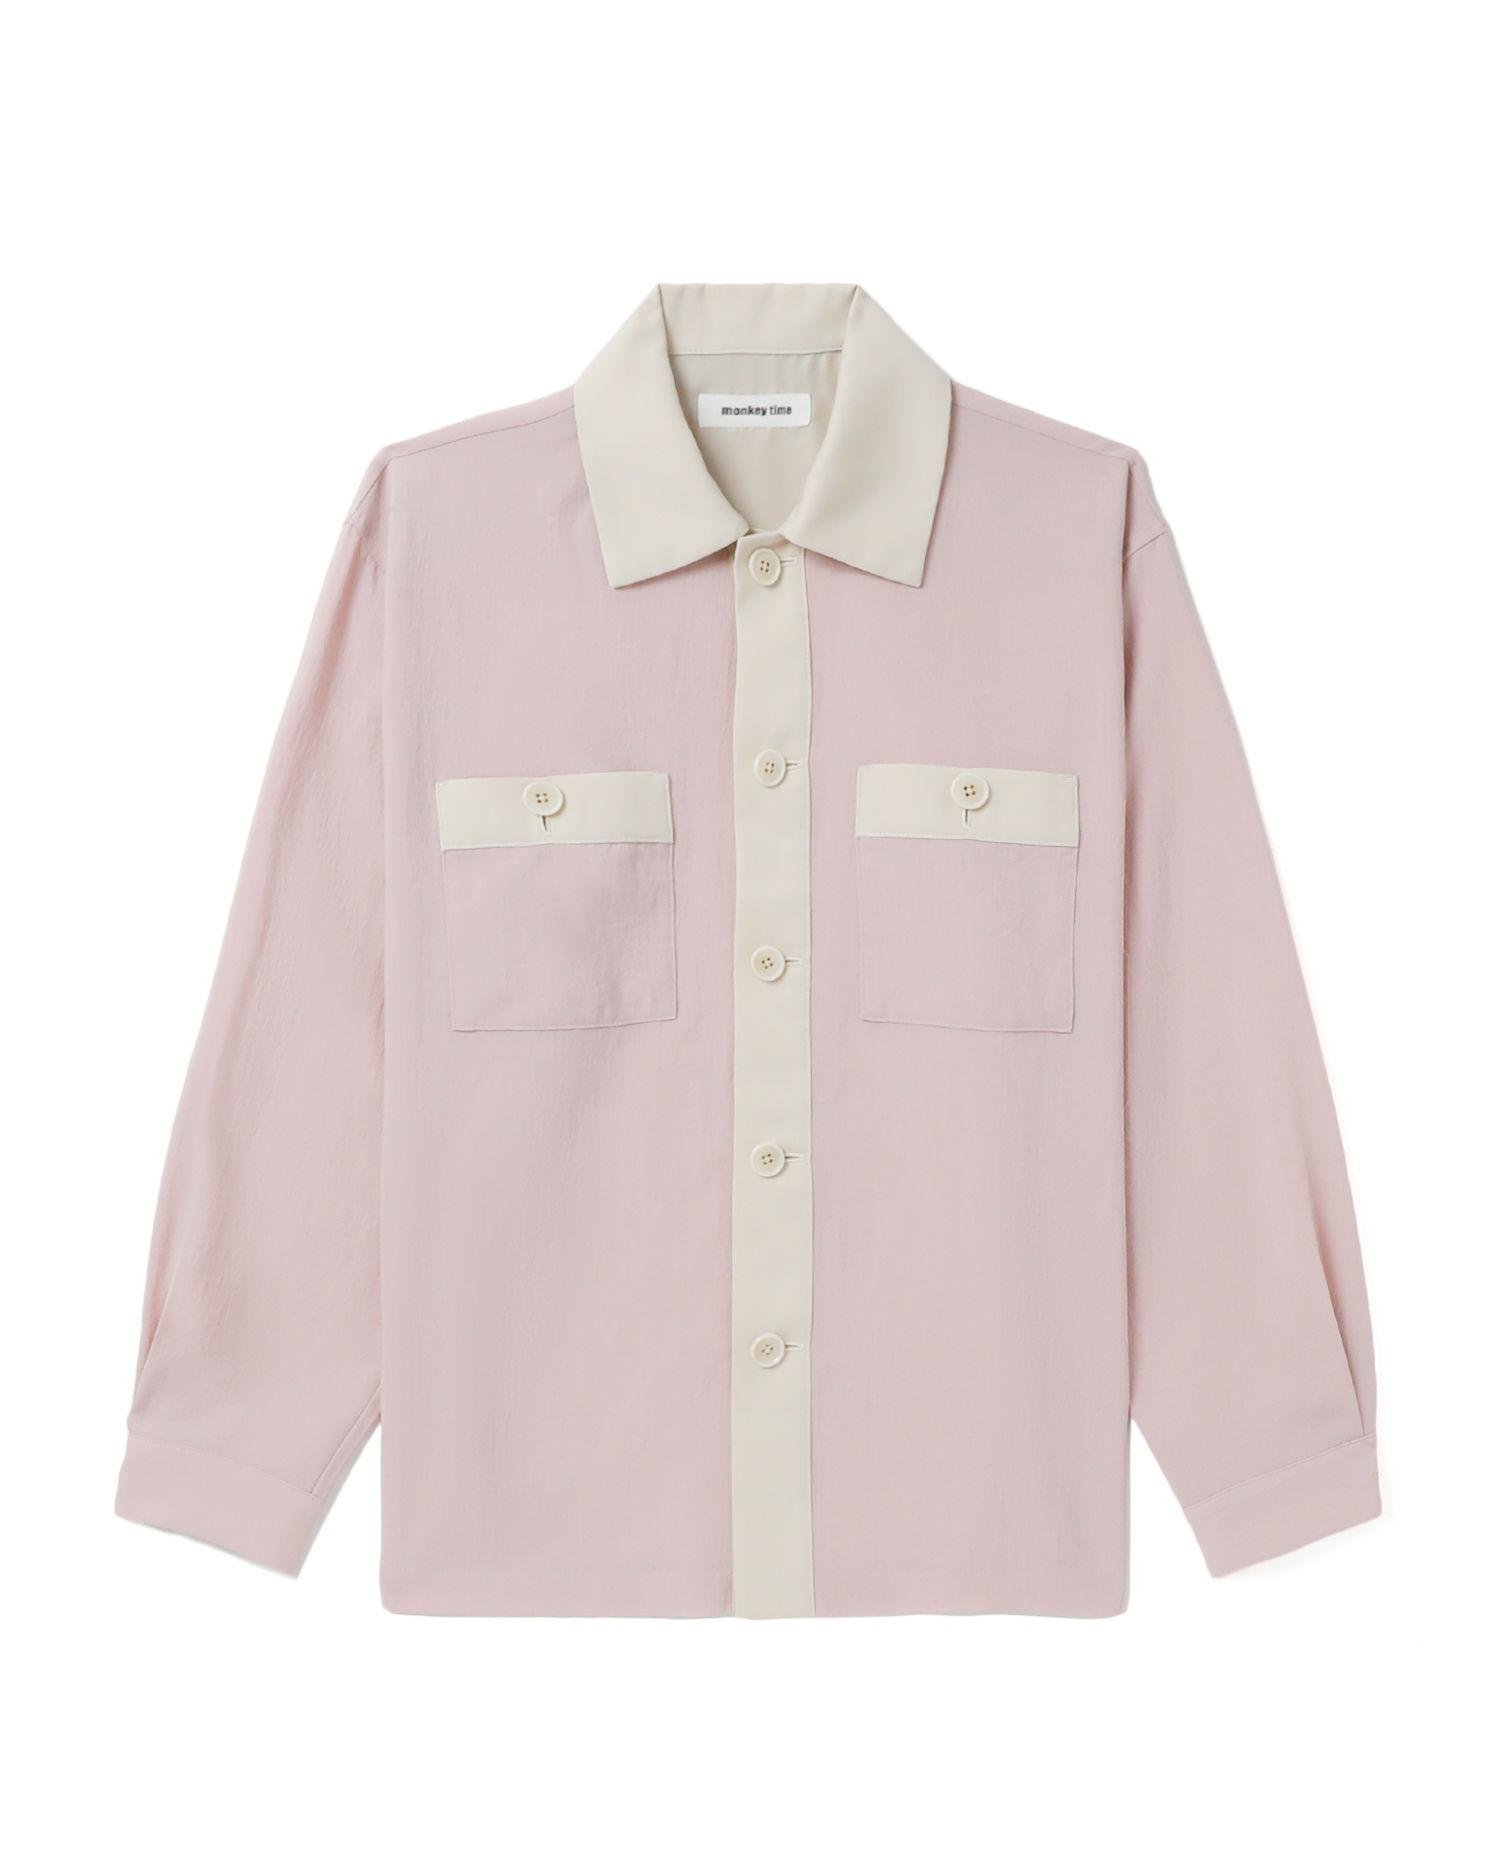 Buttoned shirt by BEAUTY&YOUTH MONKEY TIME